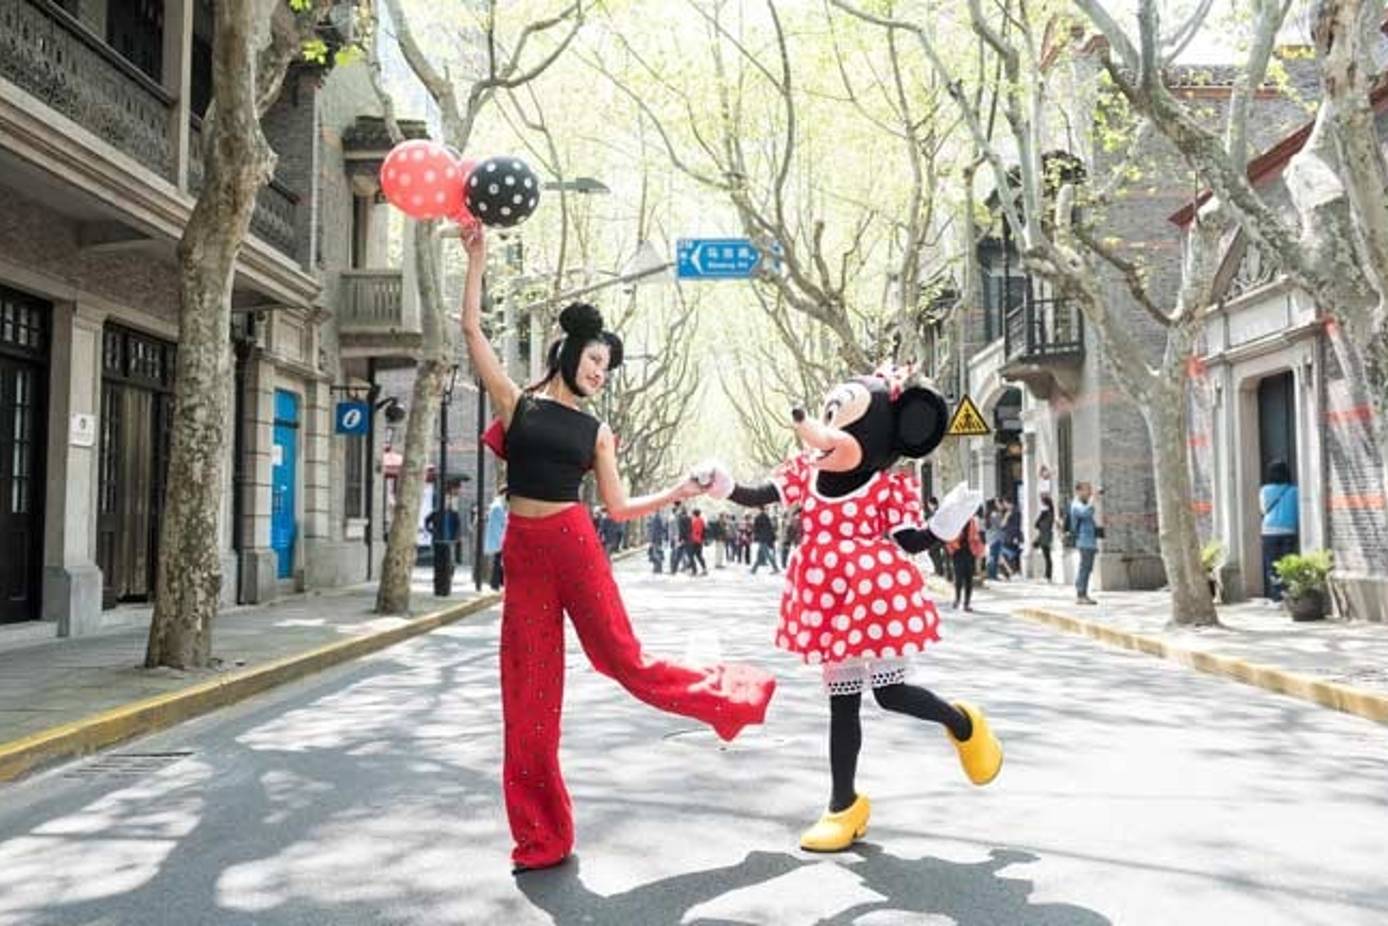 Disney Taps Celebs And Fashion Icons To Design Limited-Edition